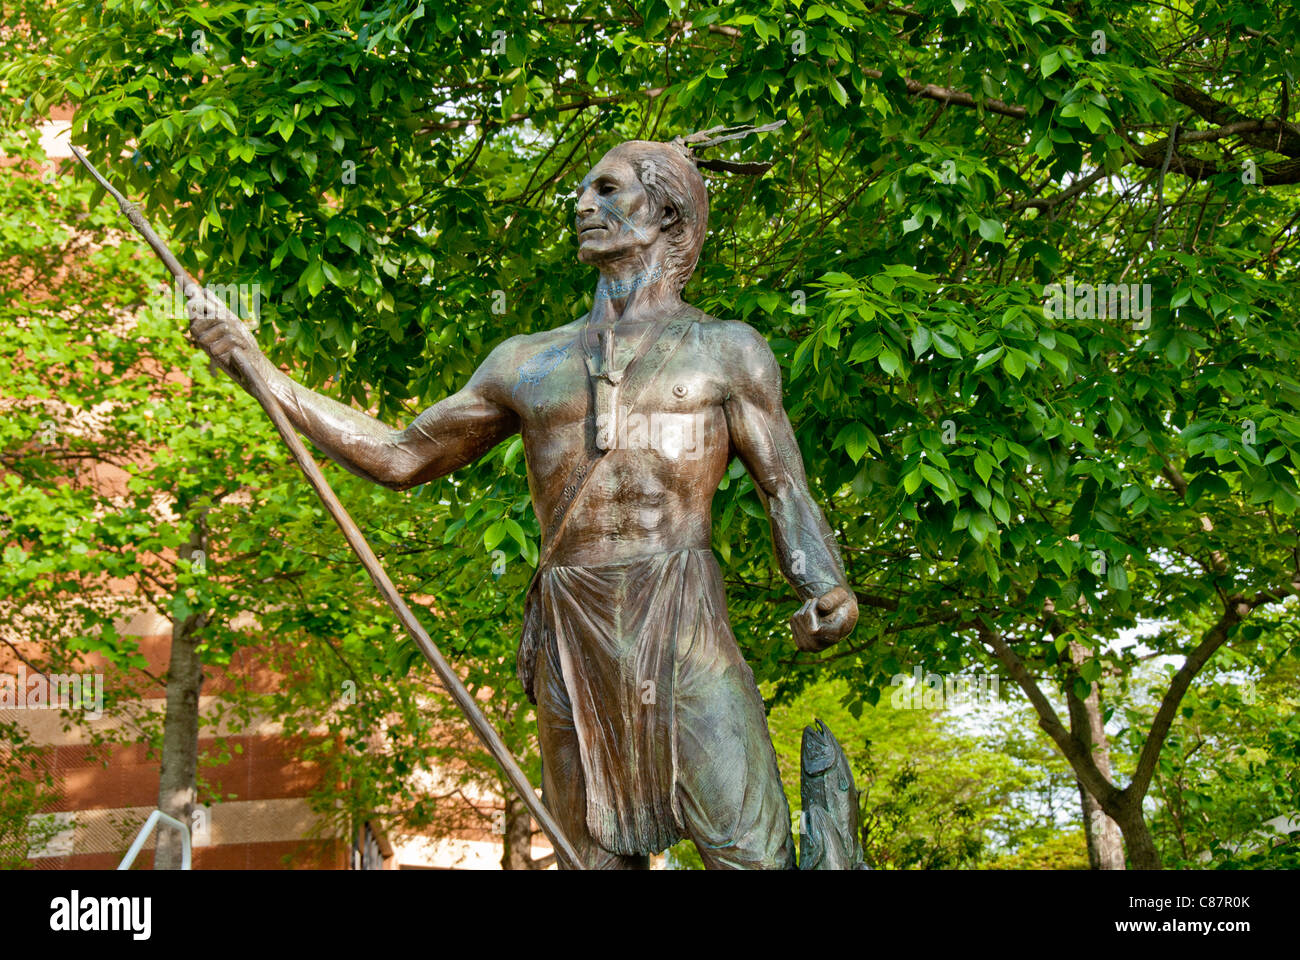 'Cherokee' sculpture by Jud Hartmann stands next to Tennessee Aquarium, Chattanooga, Tennessee, USA Stock Photo